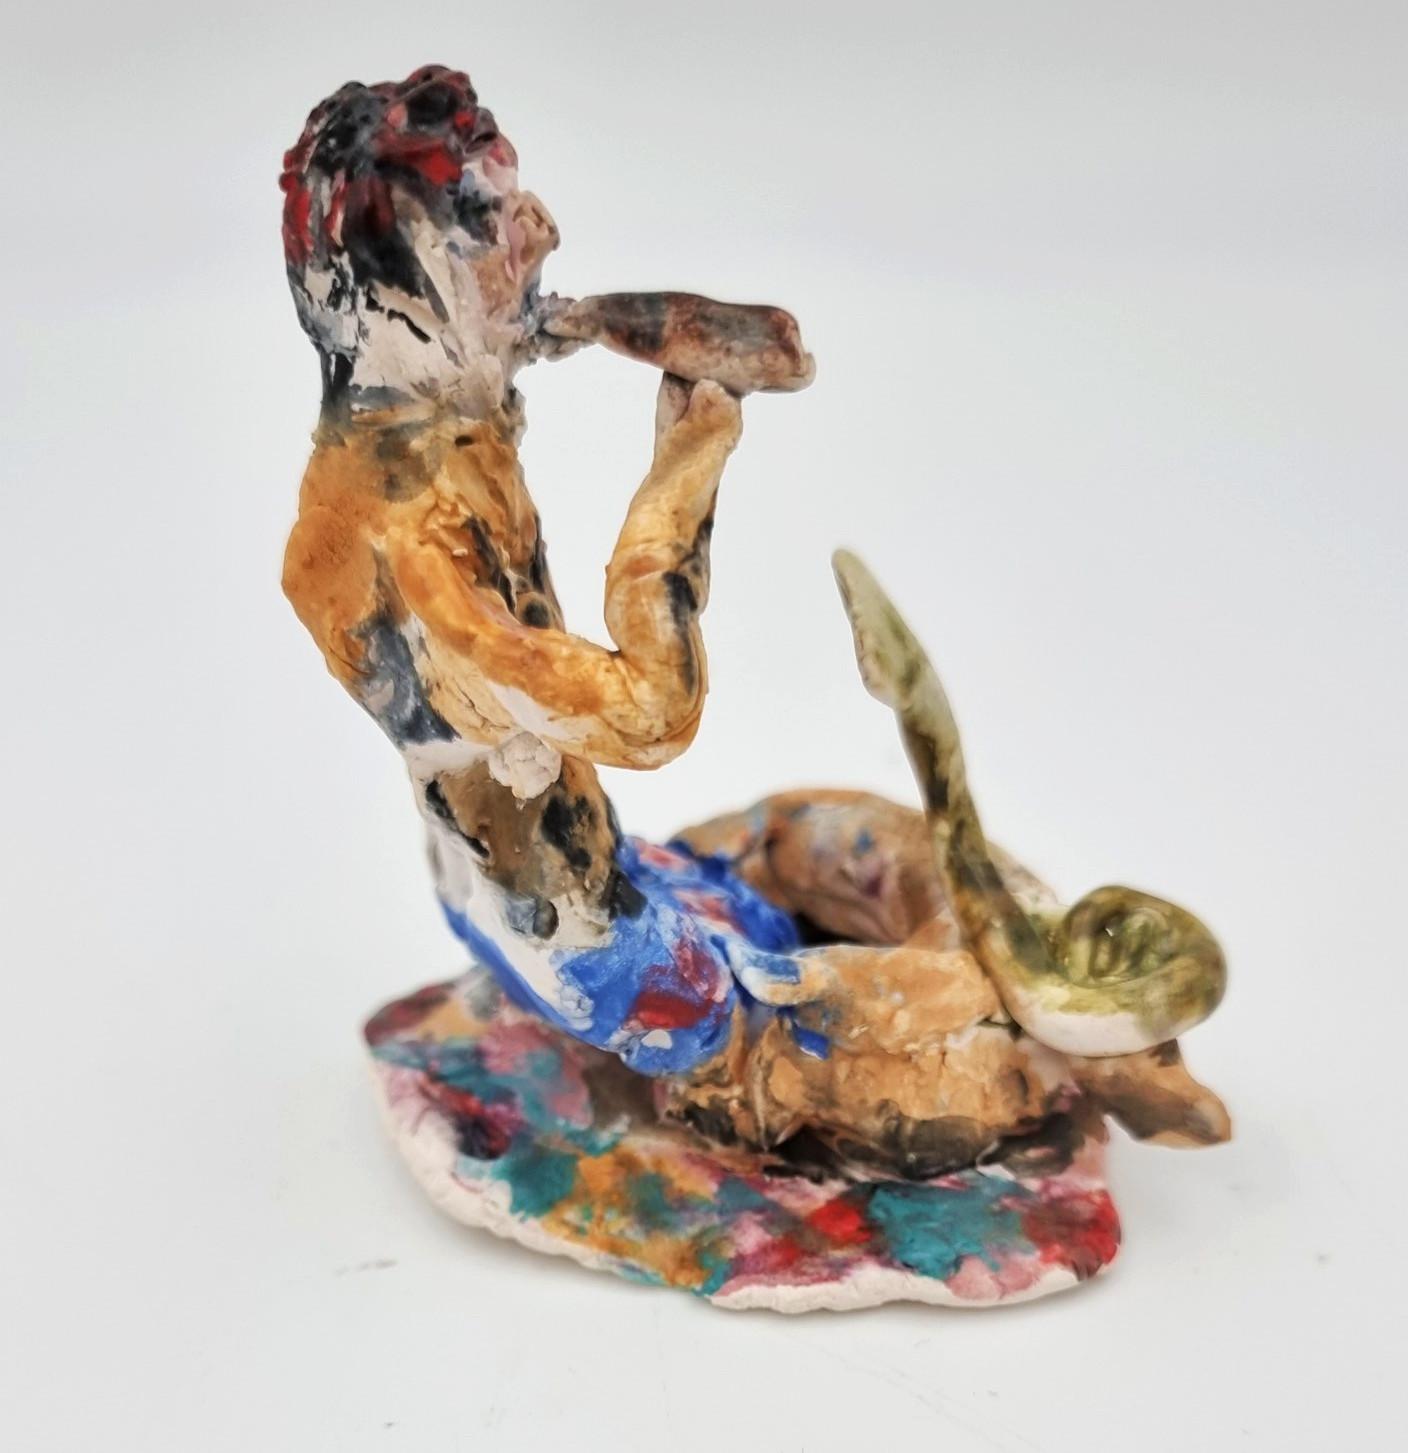 Ann Rothman
Snake Charmer (Circus, Whimsical, Viola Frey, Delicate, Playful, Fun, Cirque du Soleil, The Ringling Bros., Barnum & Bailey) 
2022
Porcelain, Low Fire Glazes, Crayons, Watercolors
Fired Cone 06, 04
3.75 x 3 x 3 inches
COA provided
Ref.: